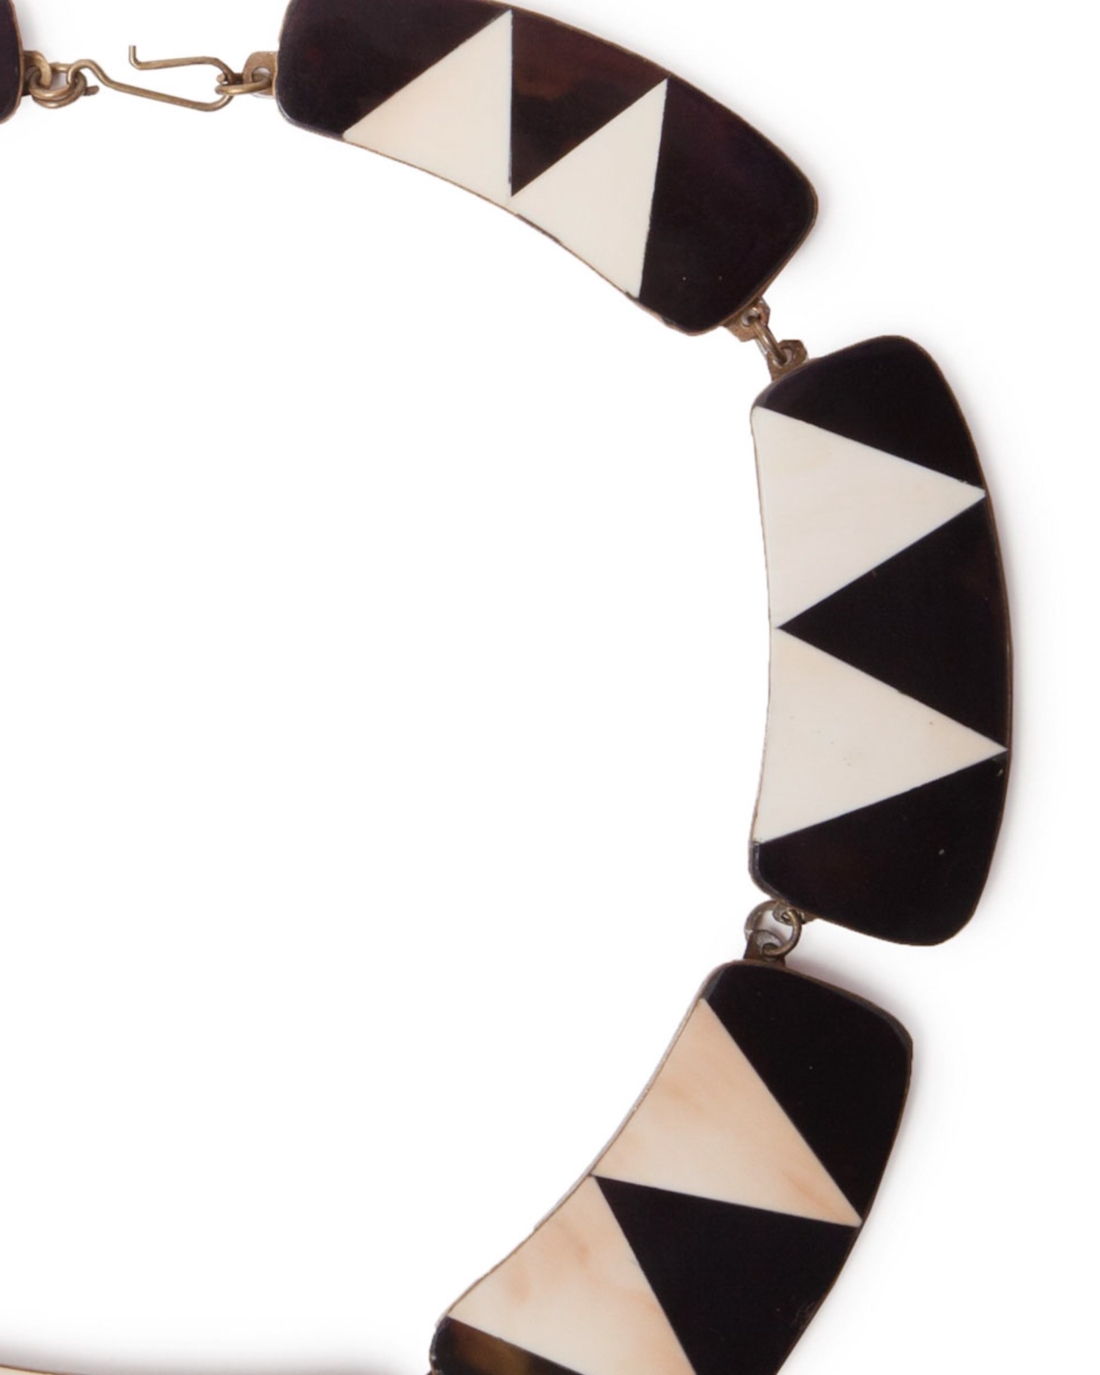 Mosaic Mother of Pearl and Black Onyx Inlaid Copper Necklace, circa 1970's